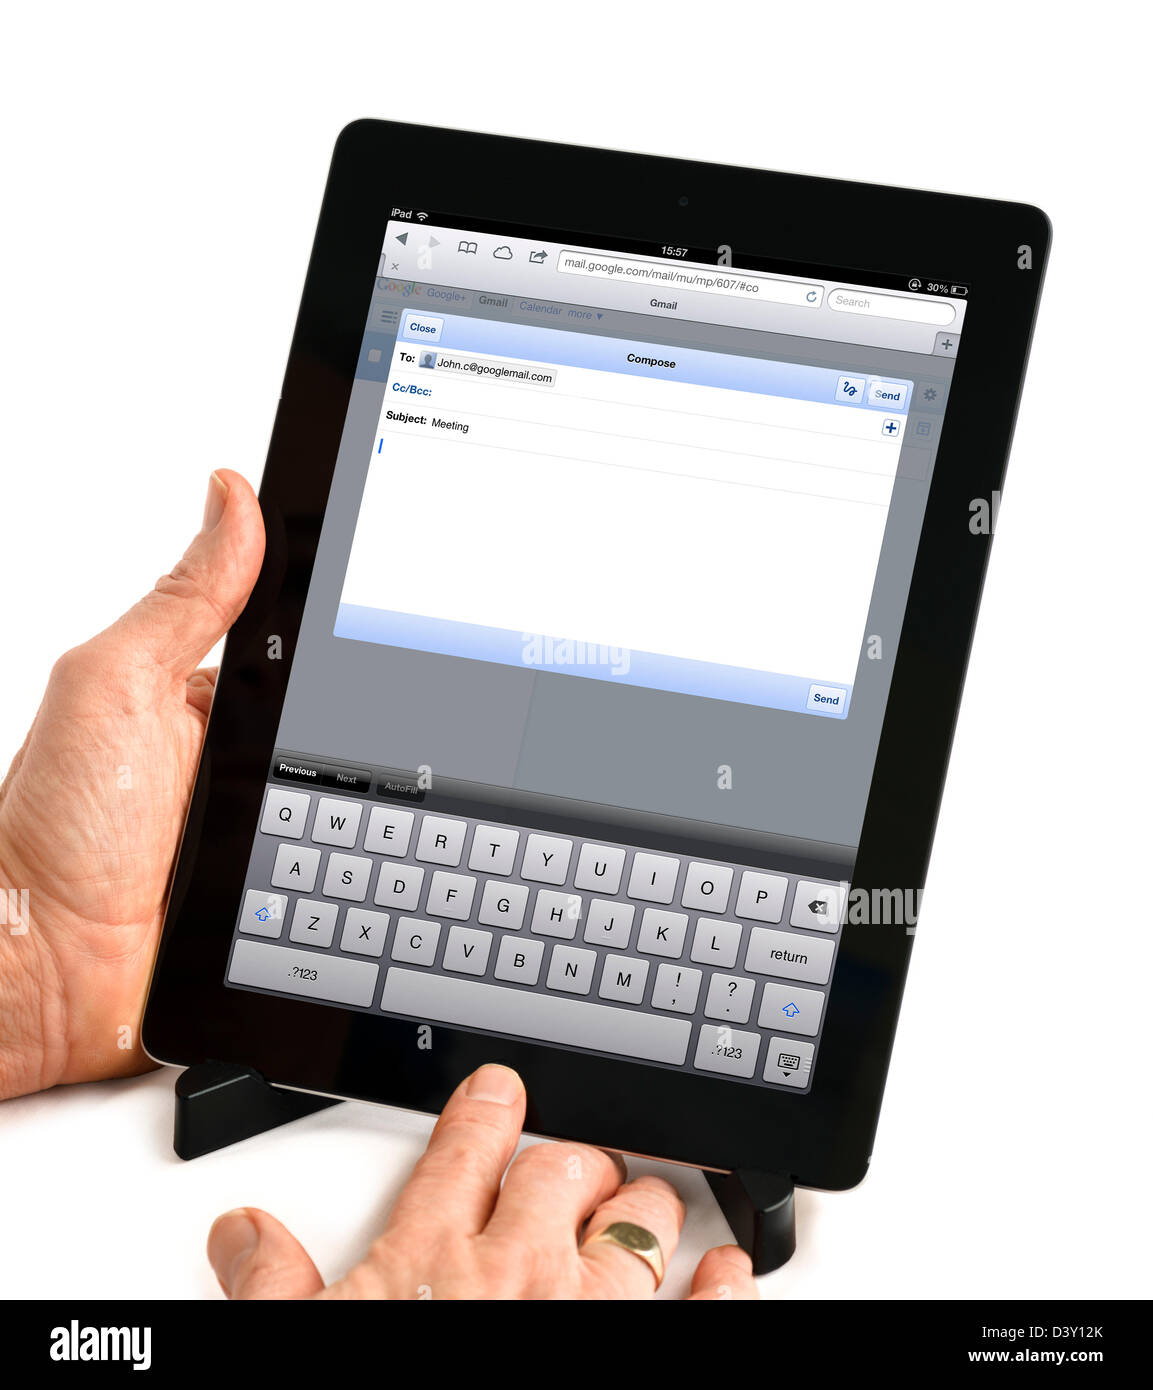 Composing an email with Google Gmail account on a 4th generation iPad, UK Stock Photo